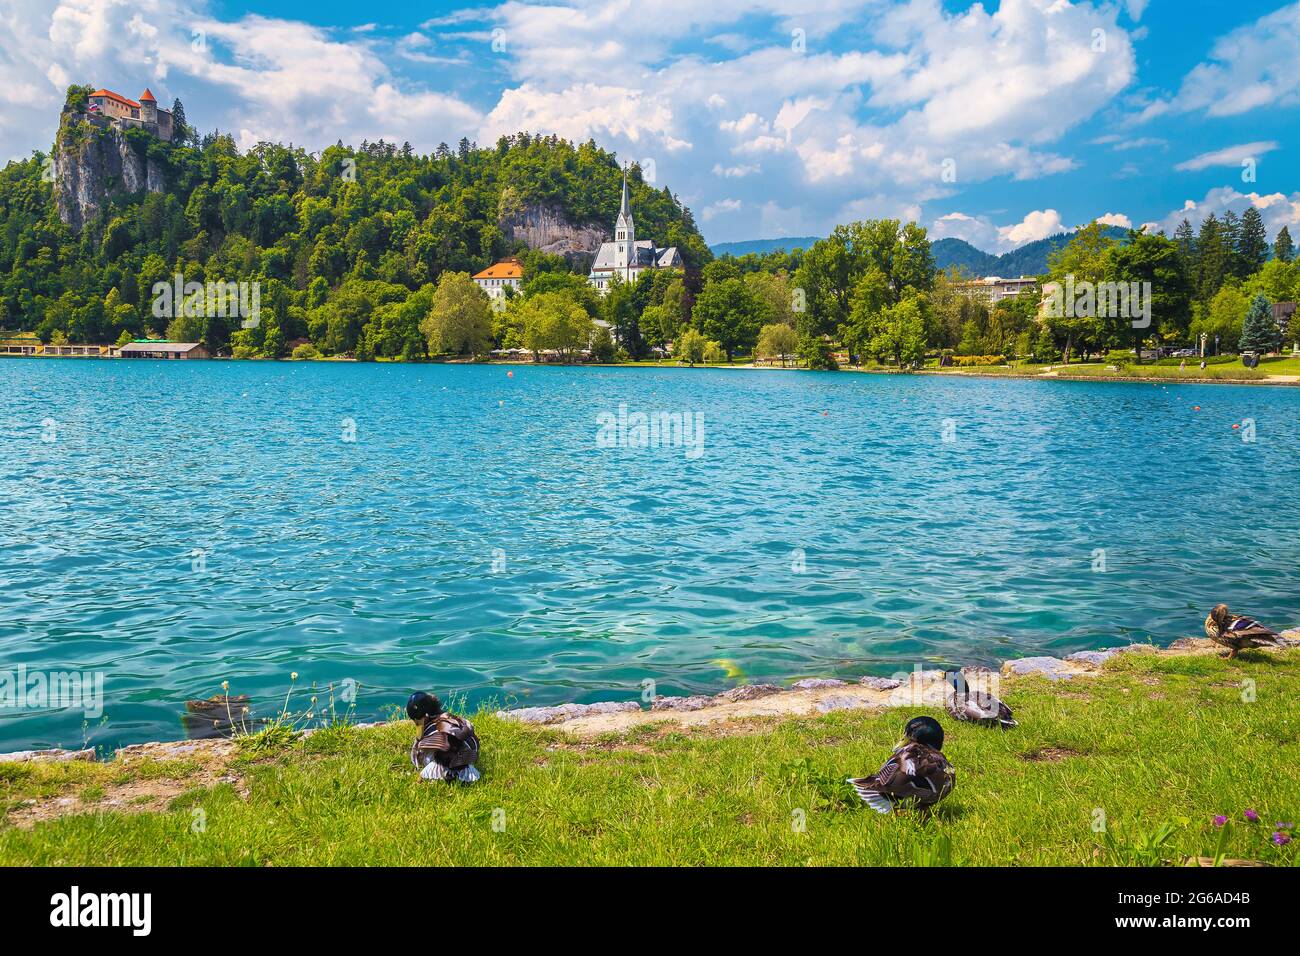 Amazing panoramic view with castle on the cliff and mallard ducks on the lake shore, Bled, Slovenia, Europe Stock Photo